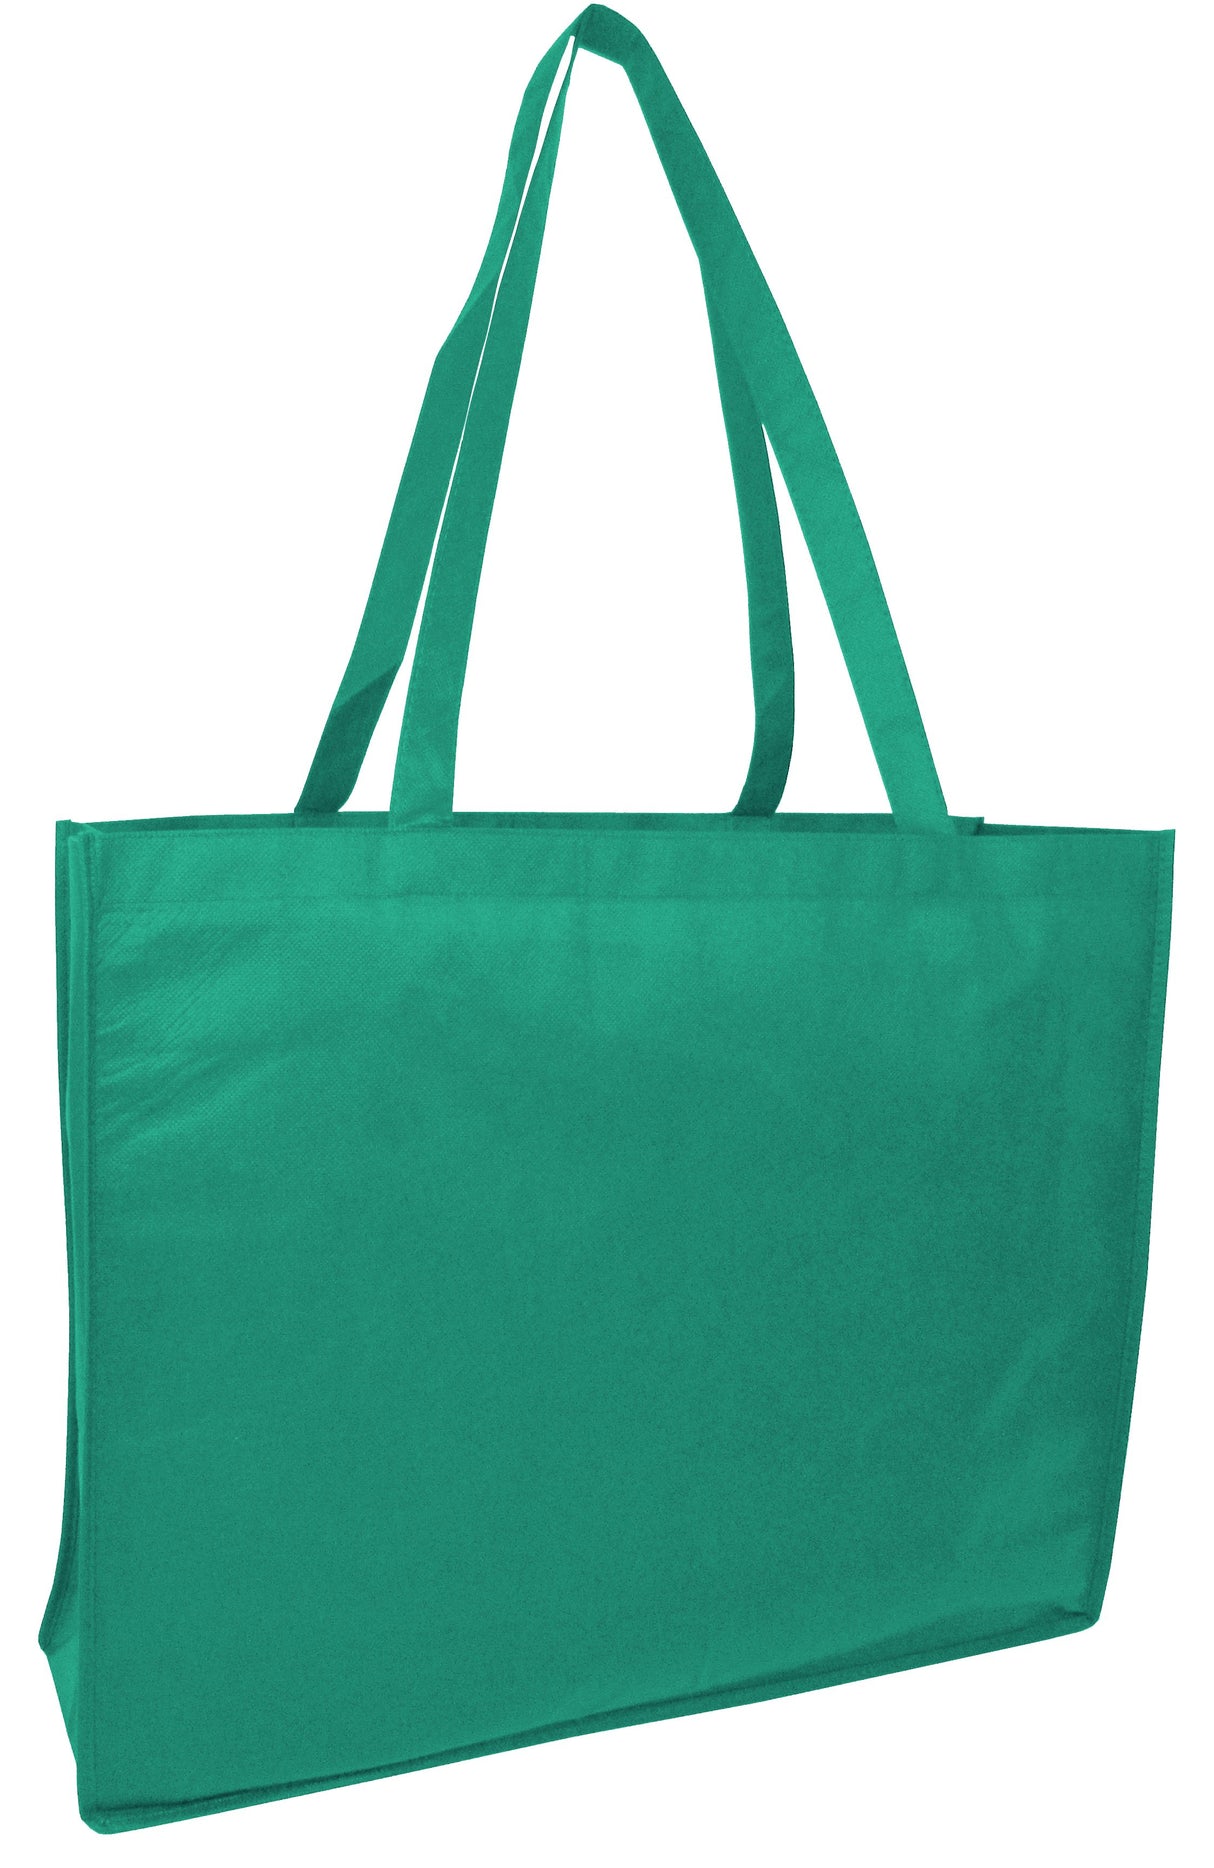 50 ct Promotional Large Size Non-Woven Tote Bag - Pack of 50